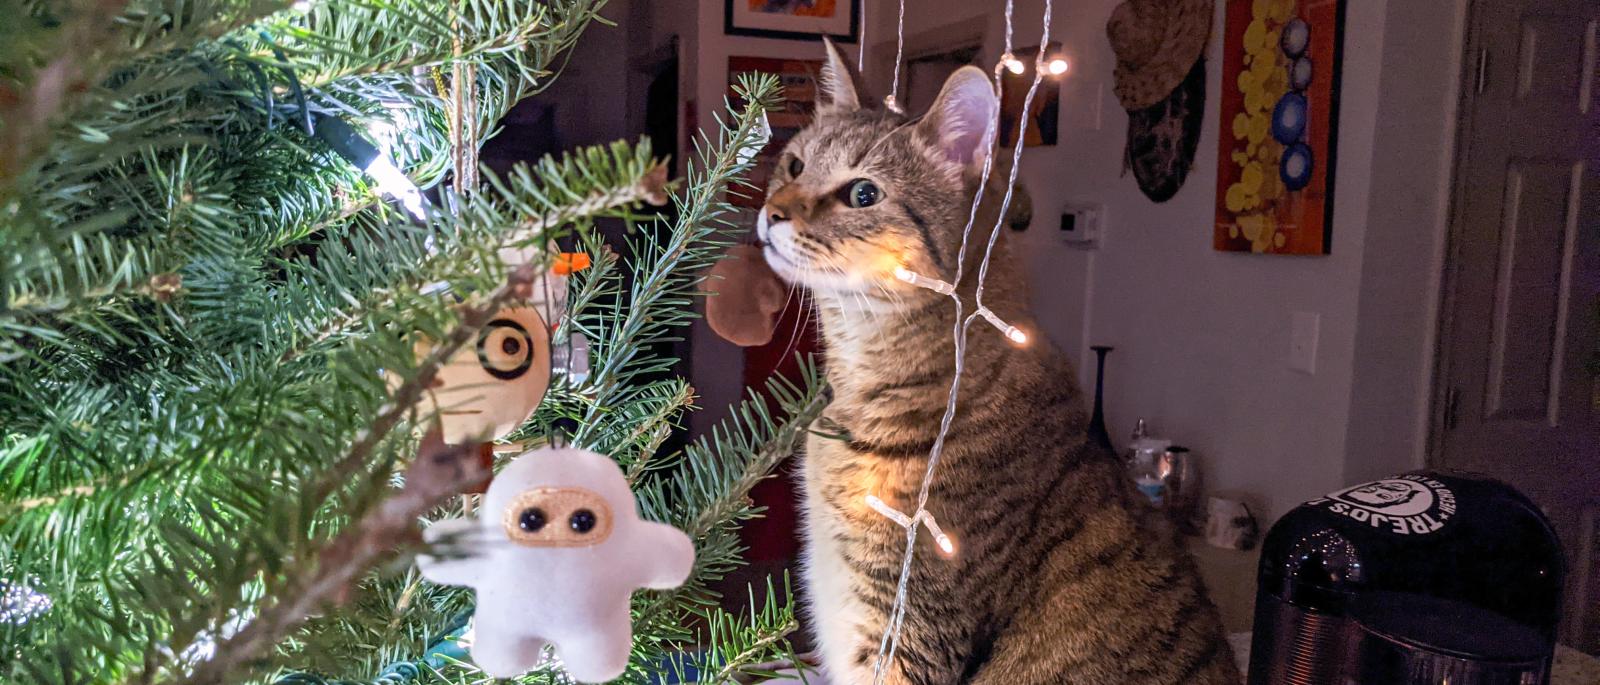 Watson the cat in a Christmas tree